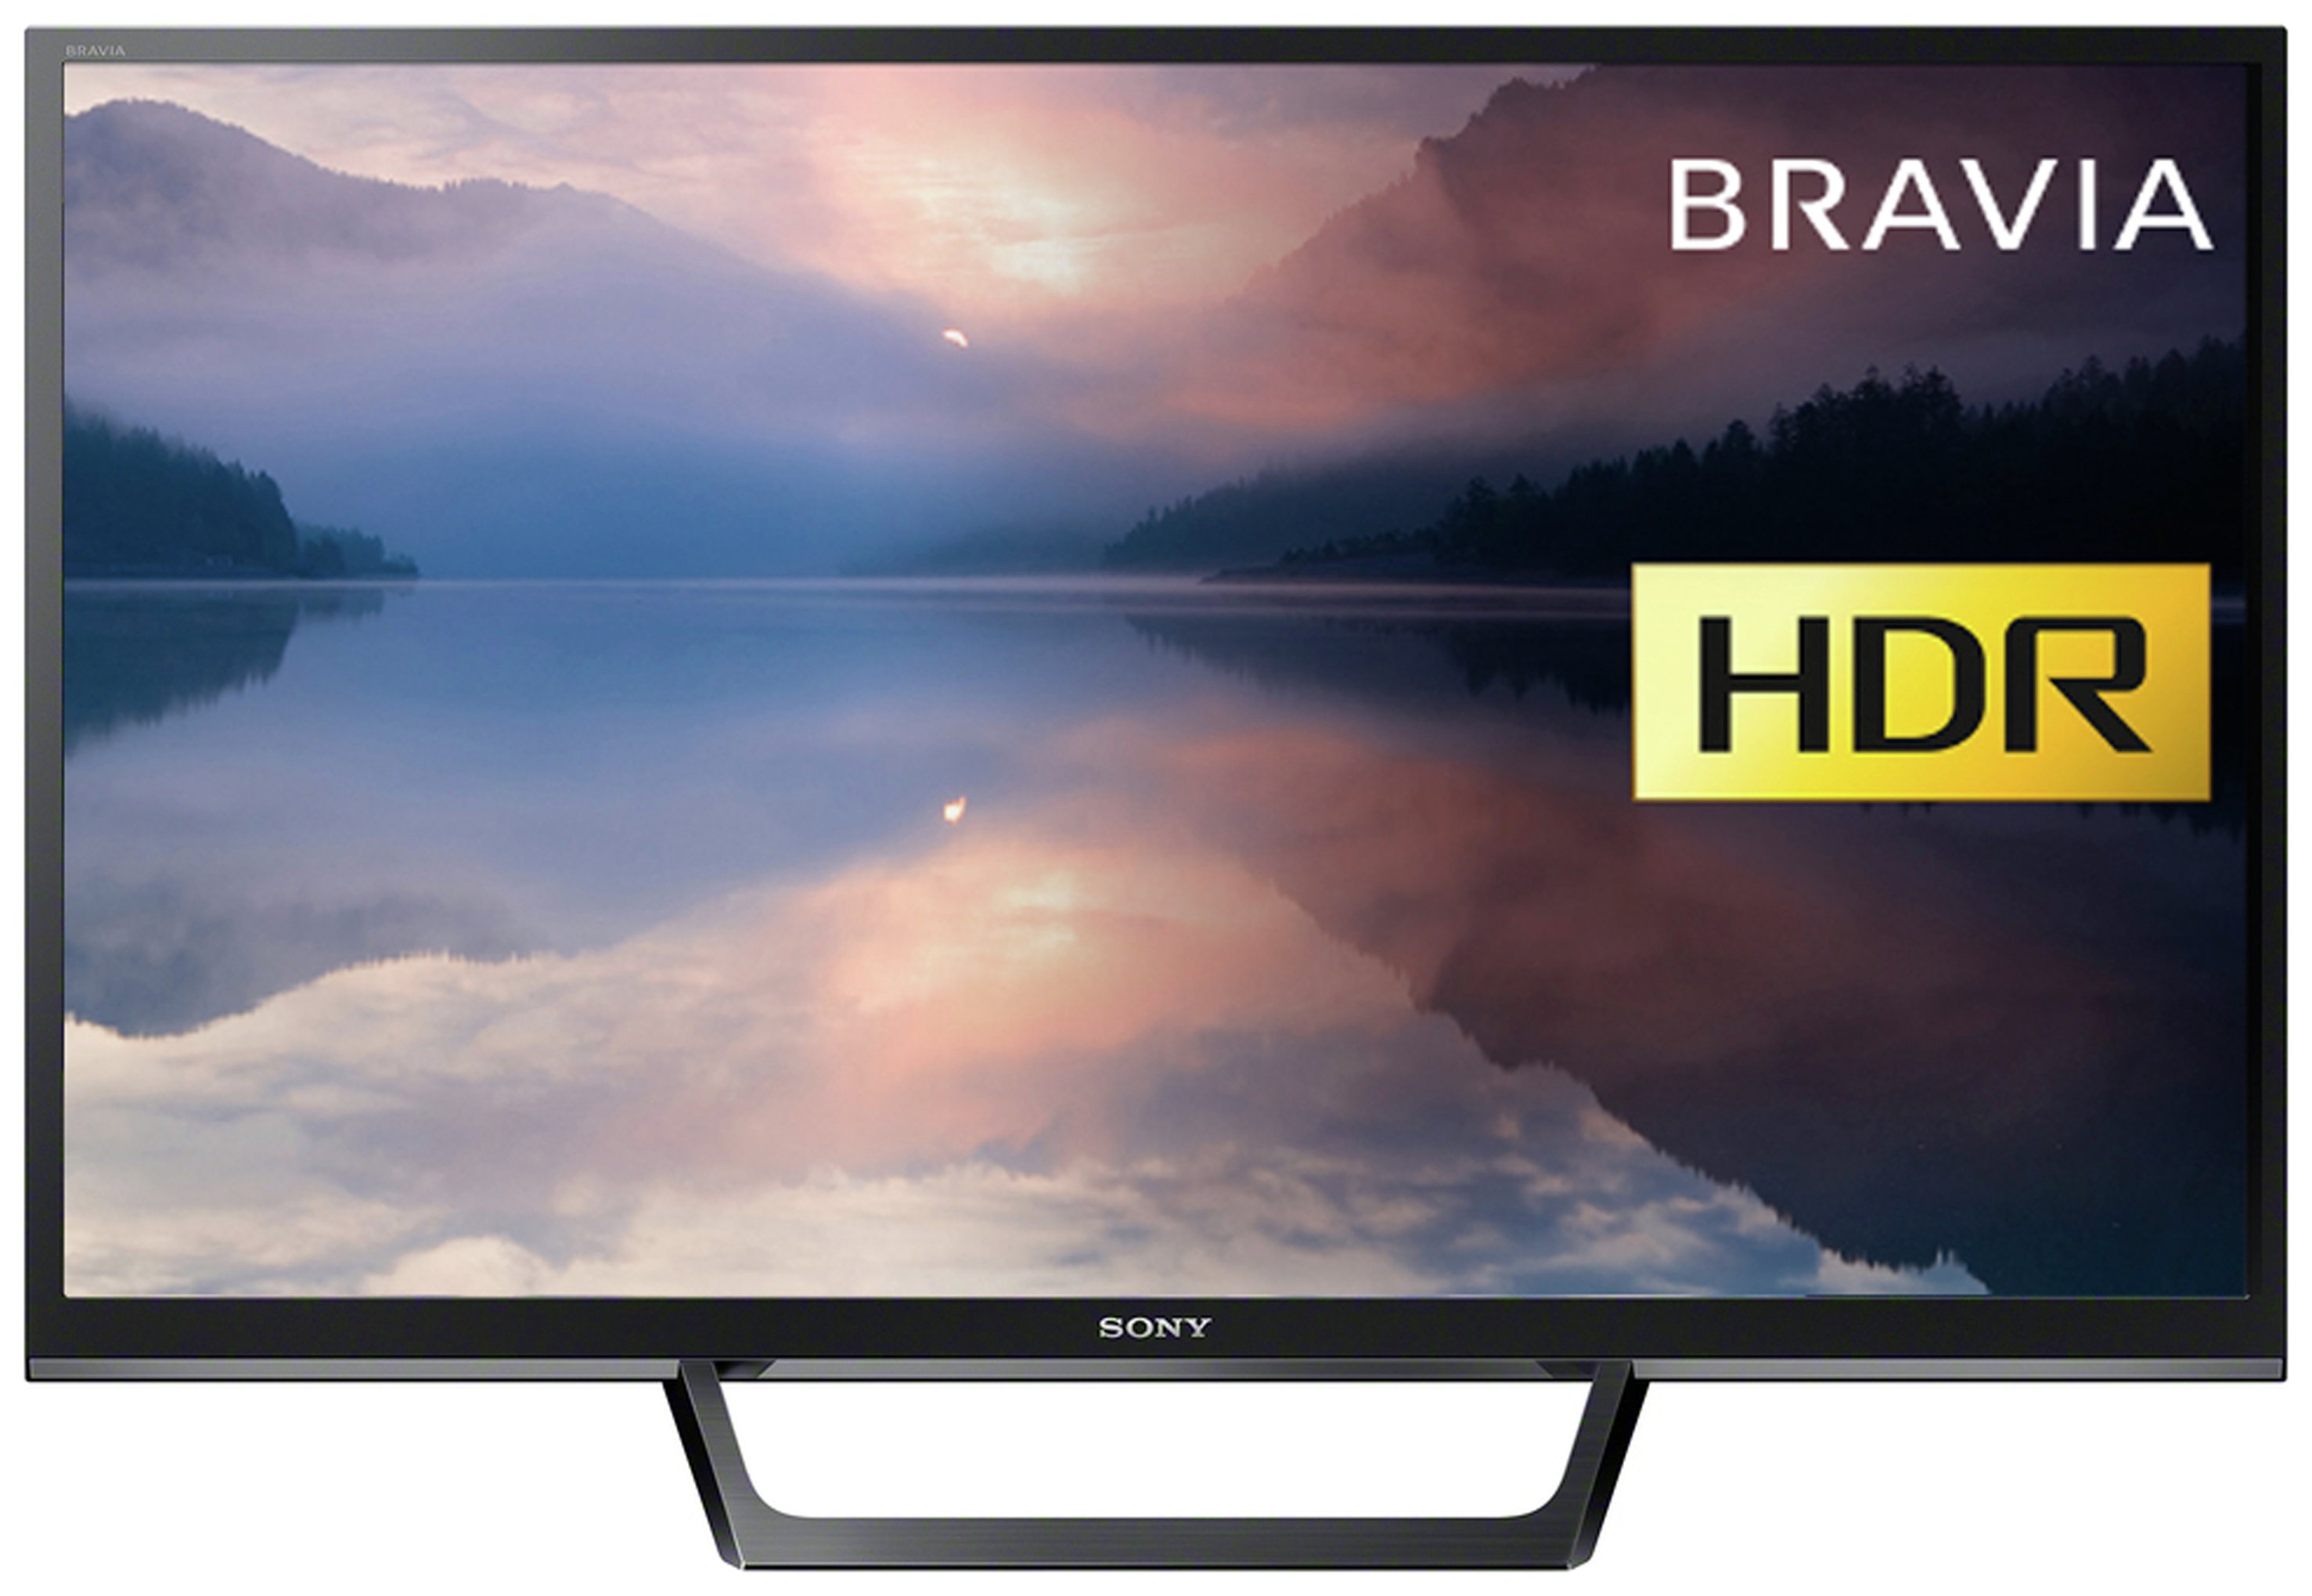 Sony KDL32RE403BU 32 Inch HD Ready TV with HDR